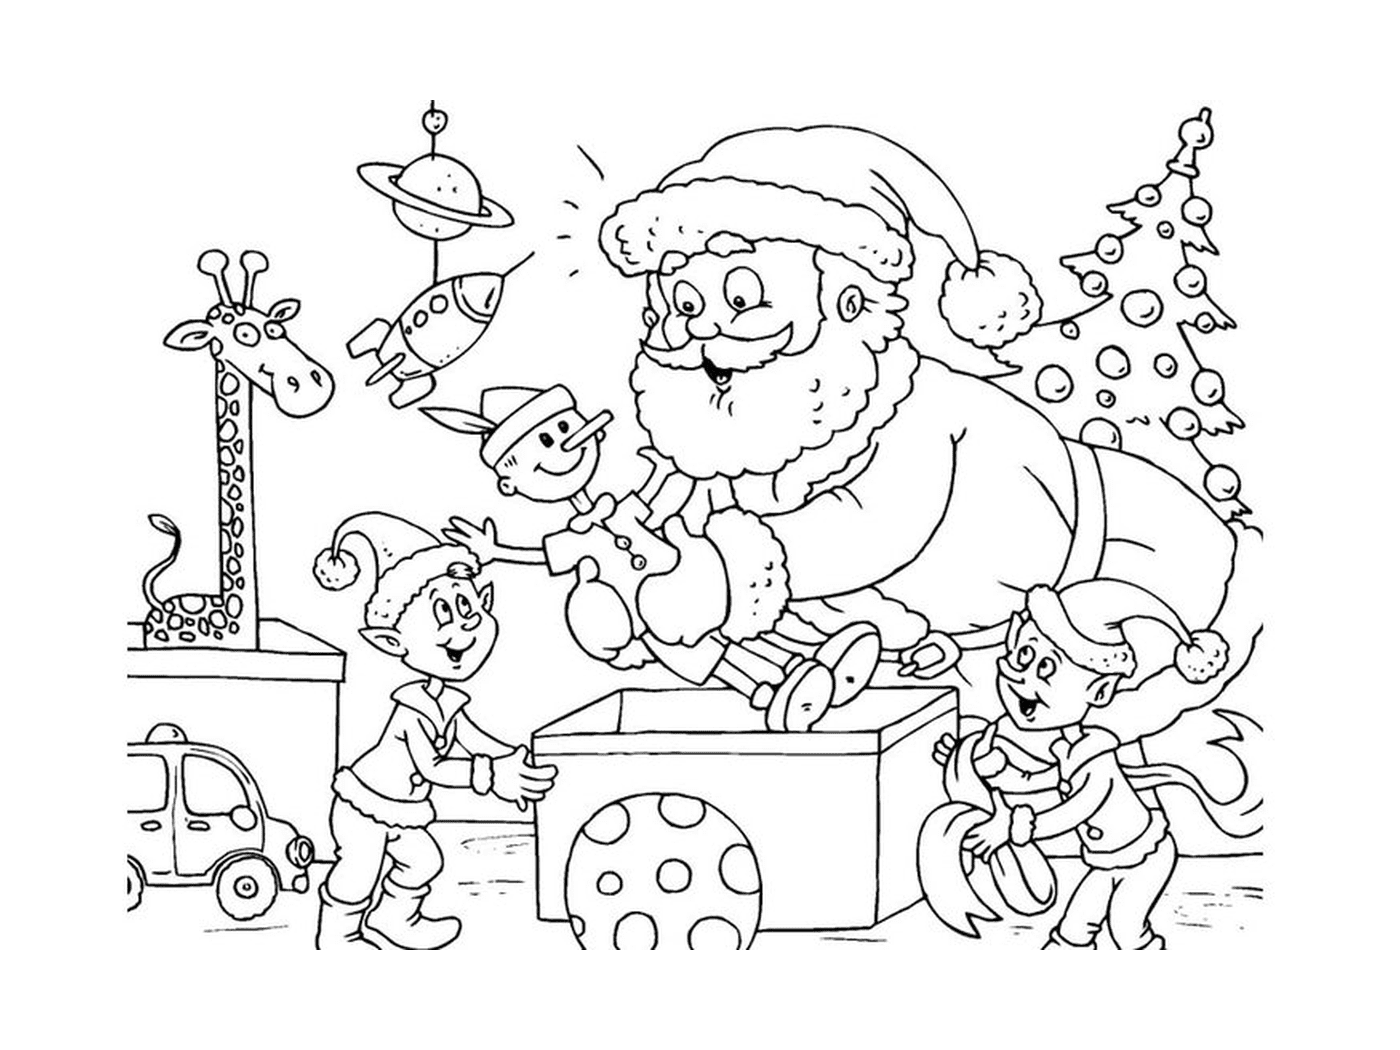  Santa Claus and Lutins with Gifts 